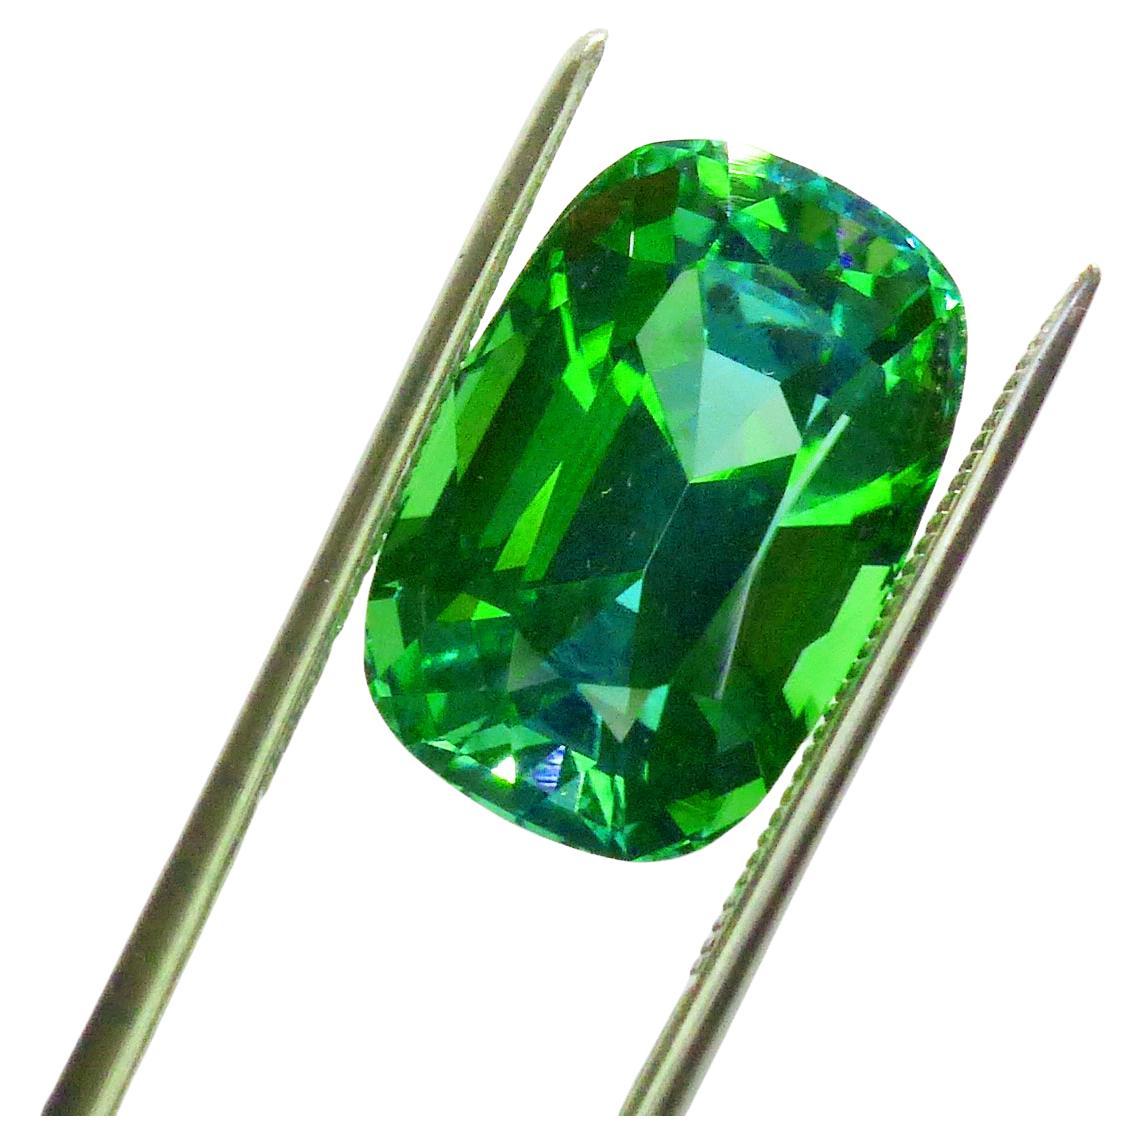 Neon Green Tourmaline (with hints/flashes of Sky or Mint Blue) - LARGE 11.30cts For Sale